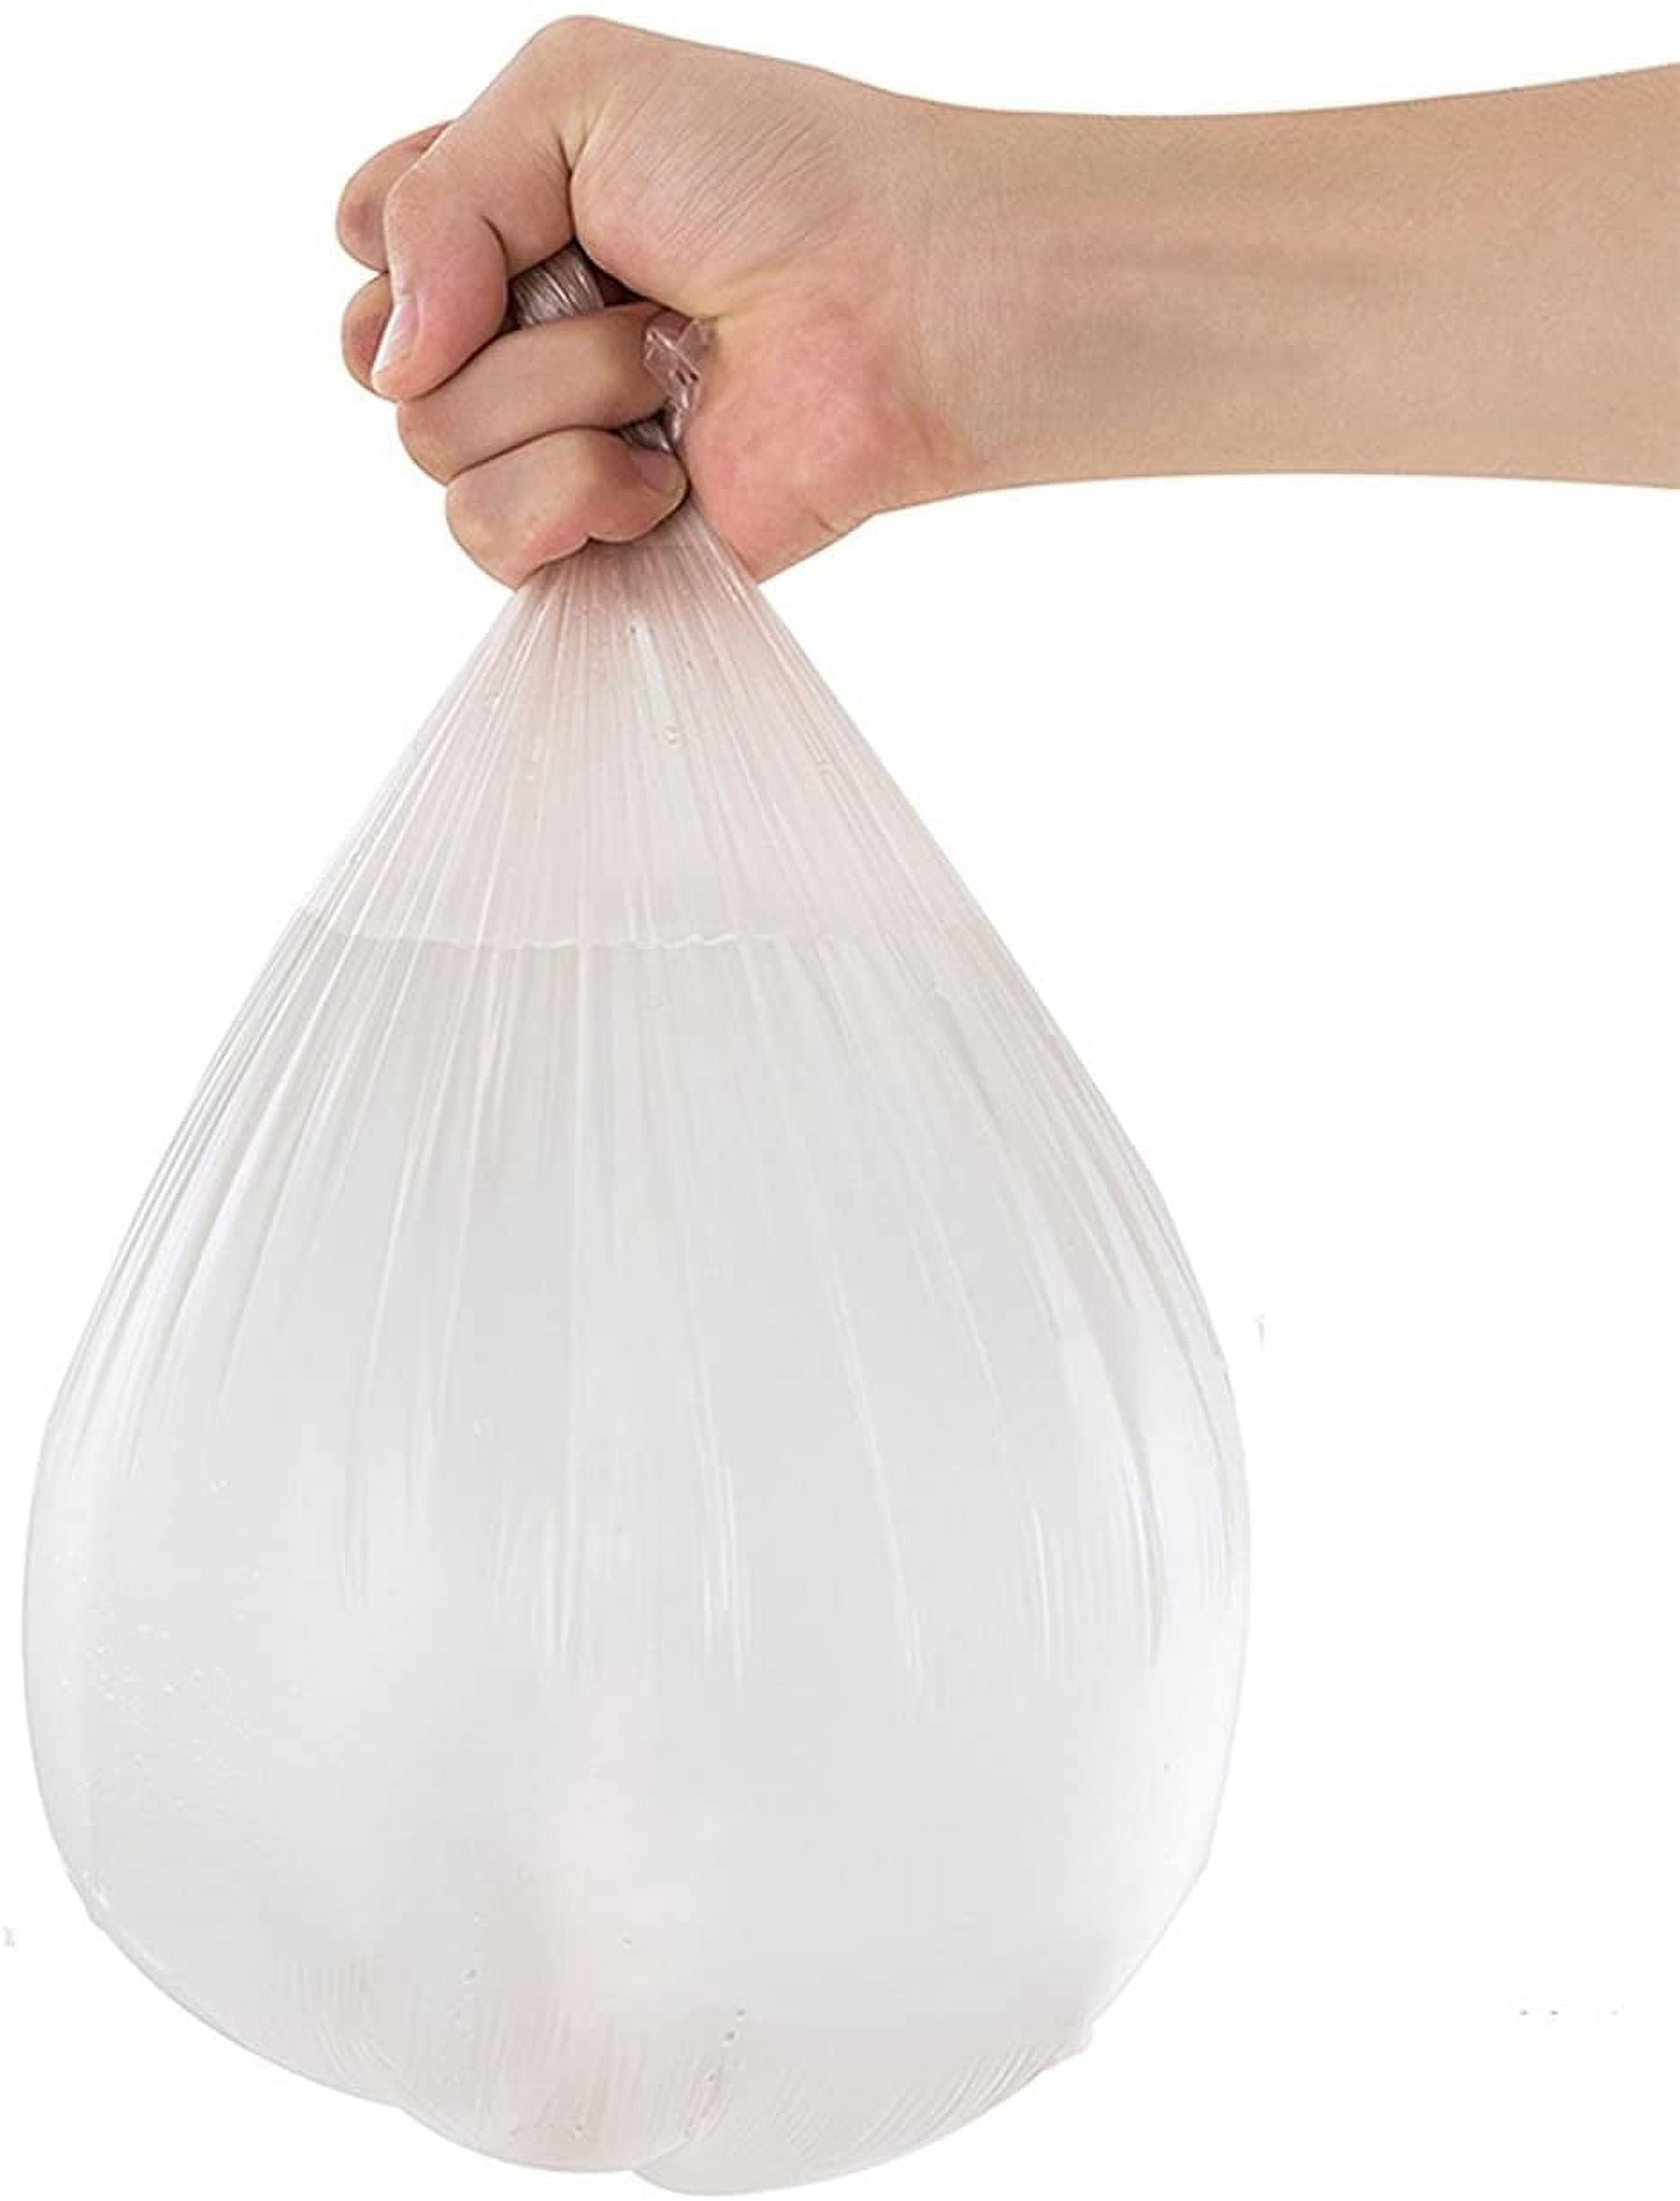 1.2 gallon trash can liners,Small clear Garbage Bags 300,Extra Strong 1 2  Gal Trash Bag,Fit 4.5-6 liters trash Bin Liners for Home Office Kitchen 1.2 Gallon Clear